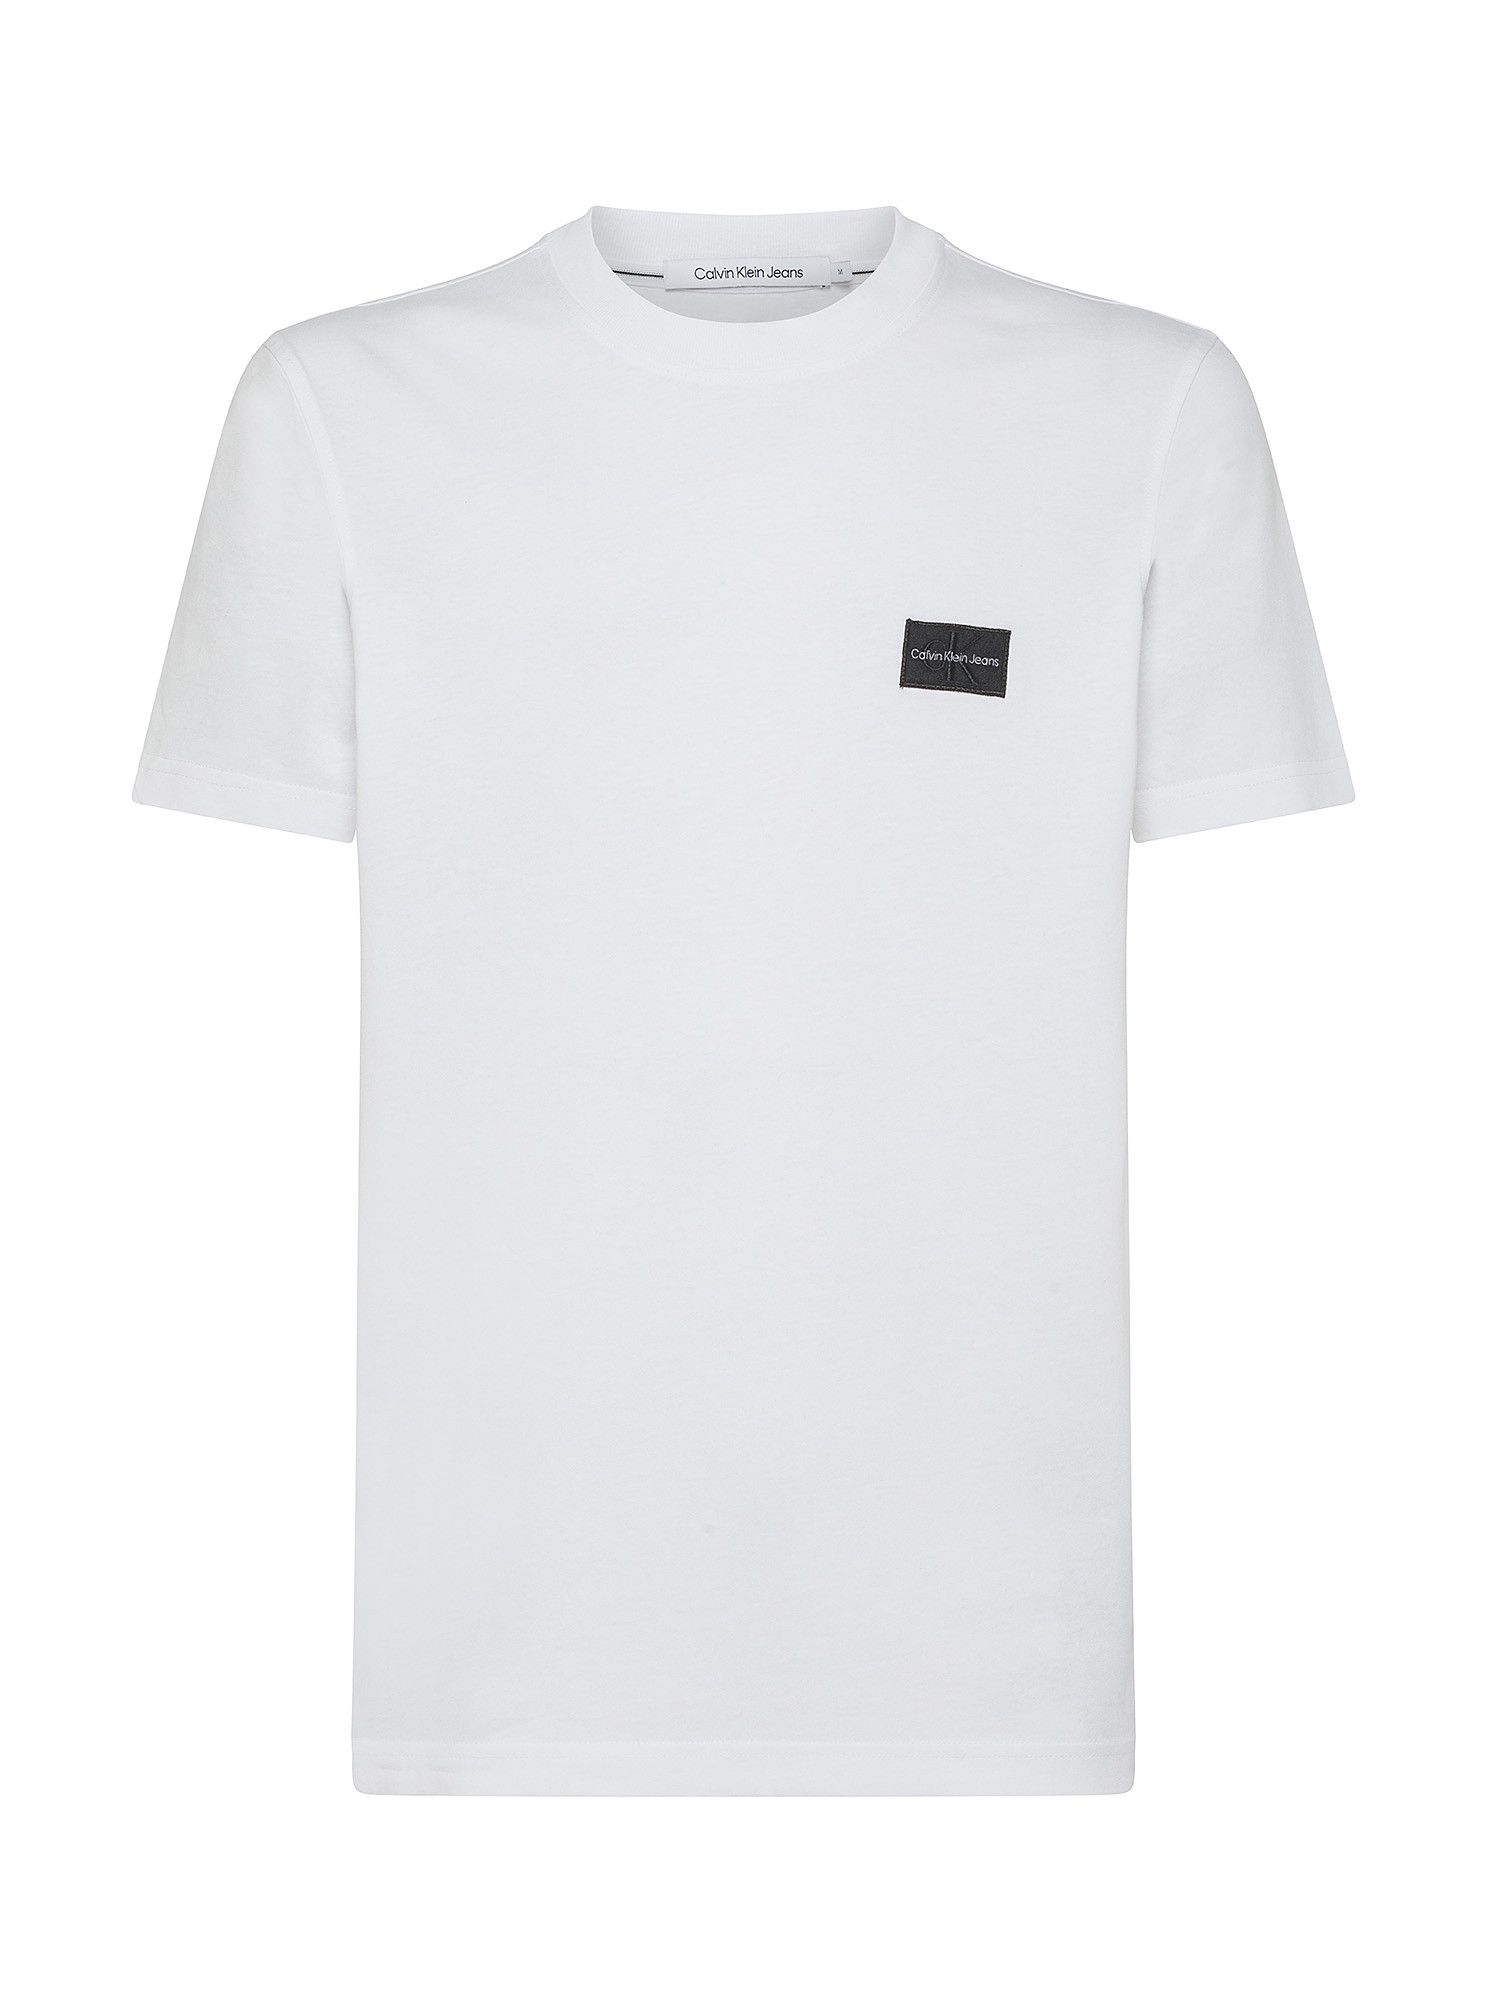 Calvin Klein Jeans - Recycled cotton T-shirt with logo, White, large image number 0